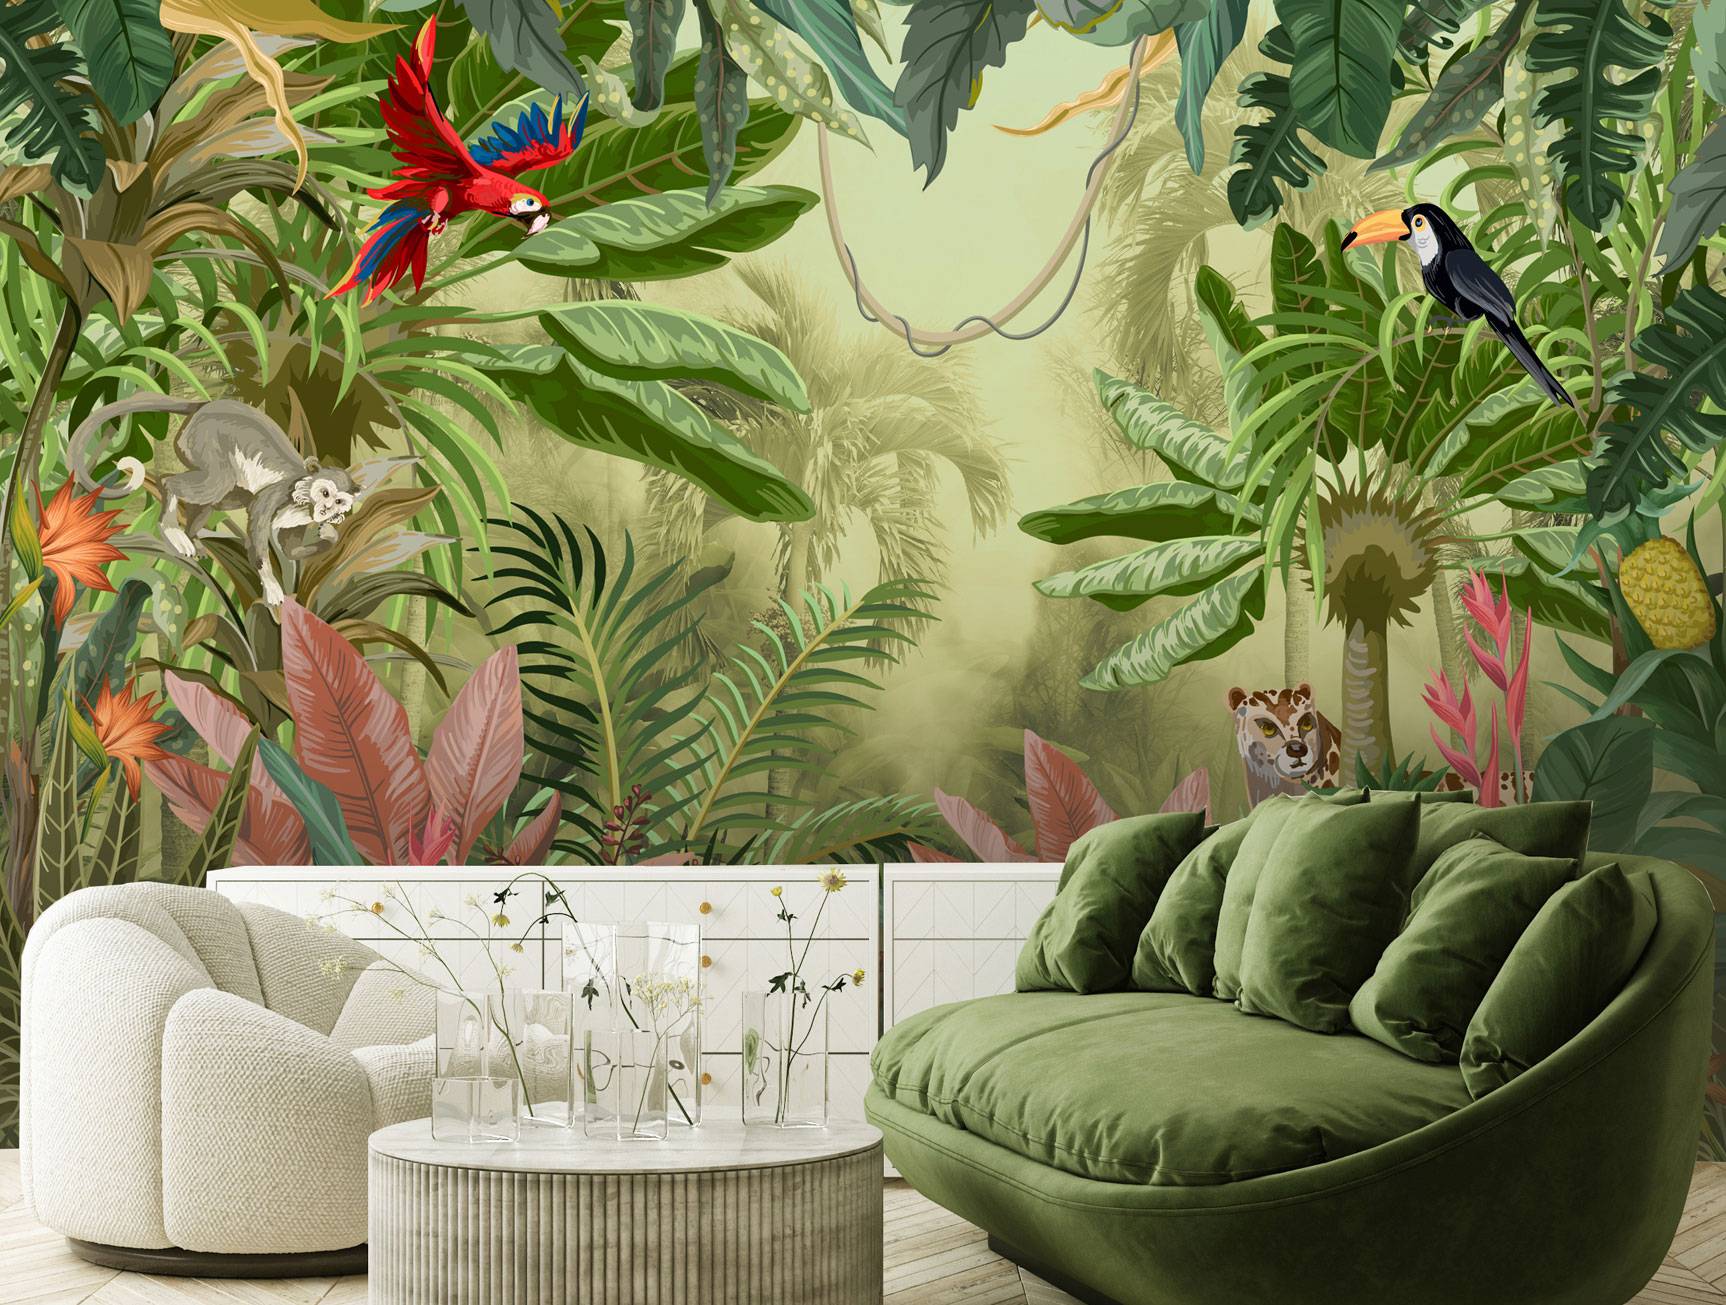 Touch the forest wallpaper mural - Nouqoush